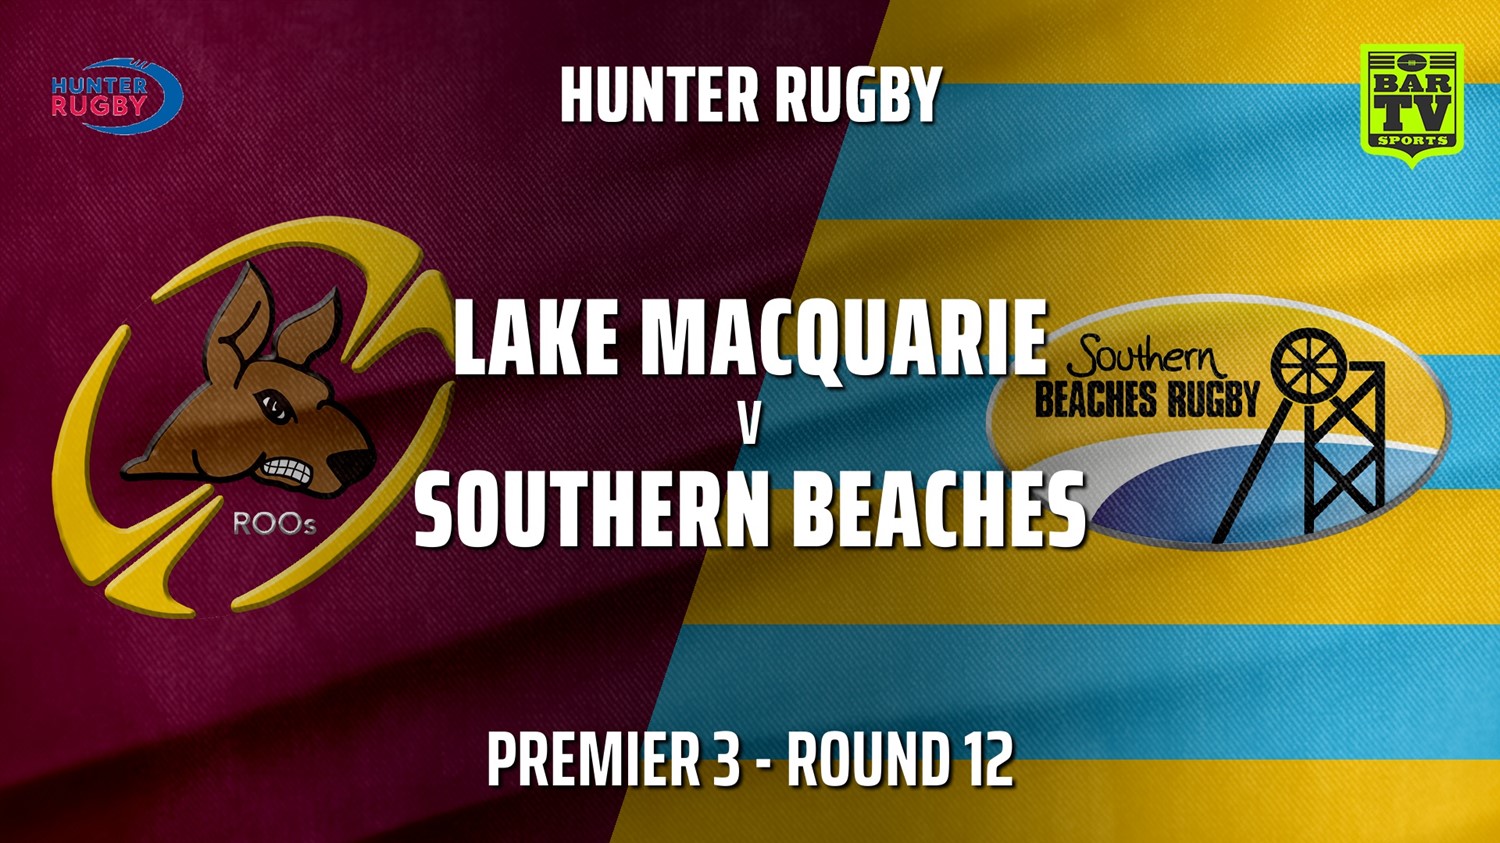 210710-Hunter Rugby Round 12 - Premier 3 - Lake Macquarie v Southern Beaches Slate Image